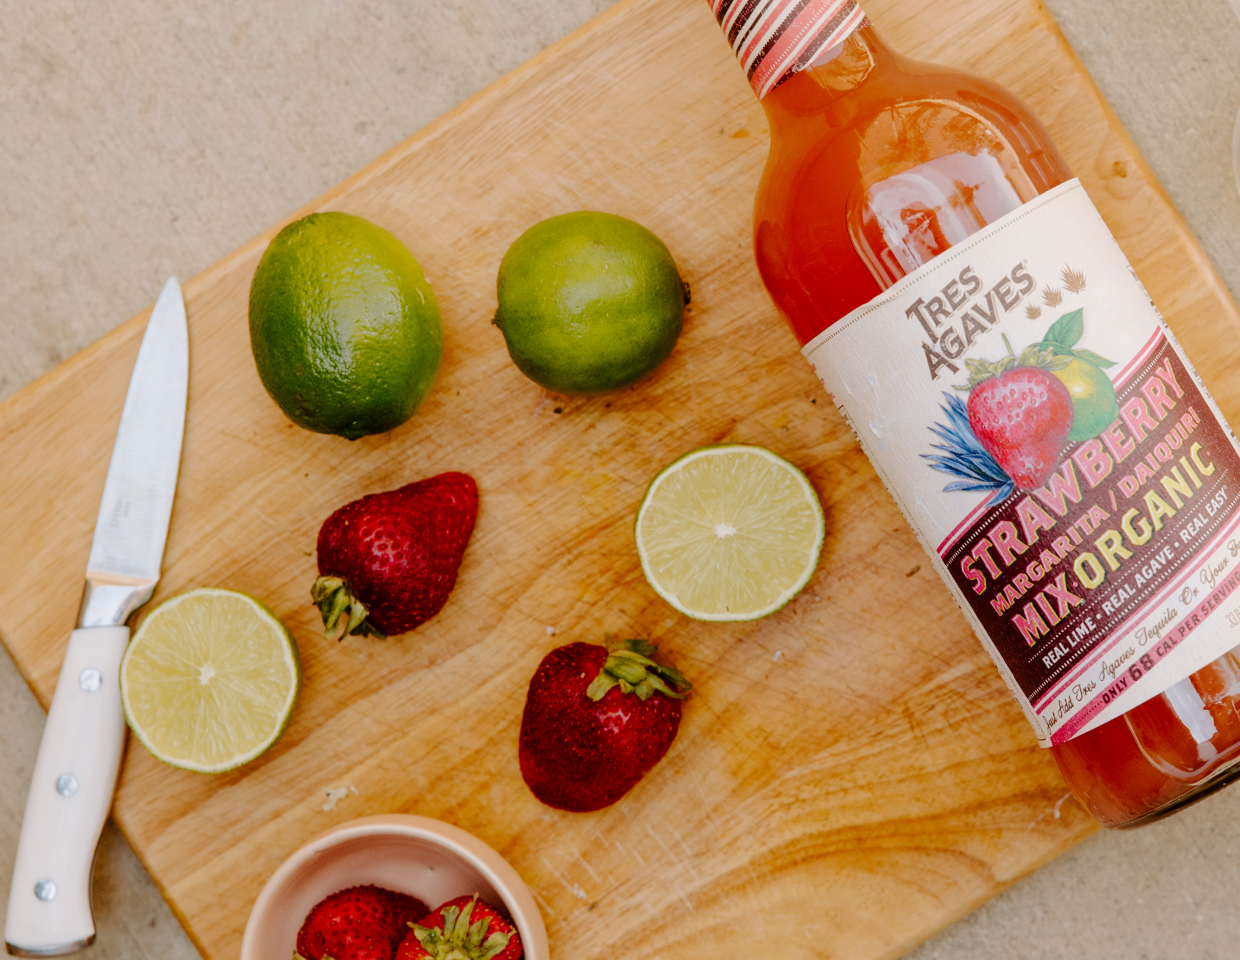 Bottle of Tres Agaves strawberry margarita mix on a cutting board next to limes and strawberries